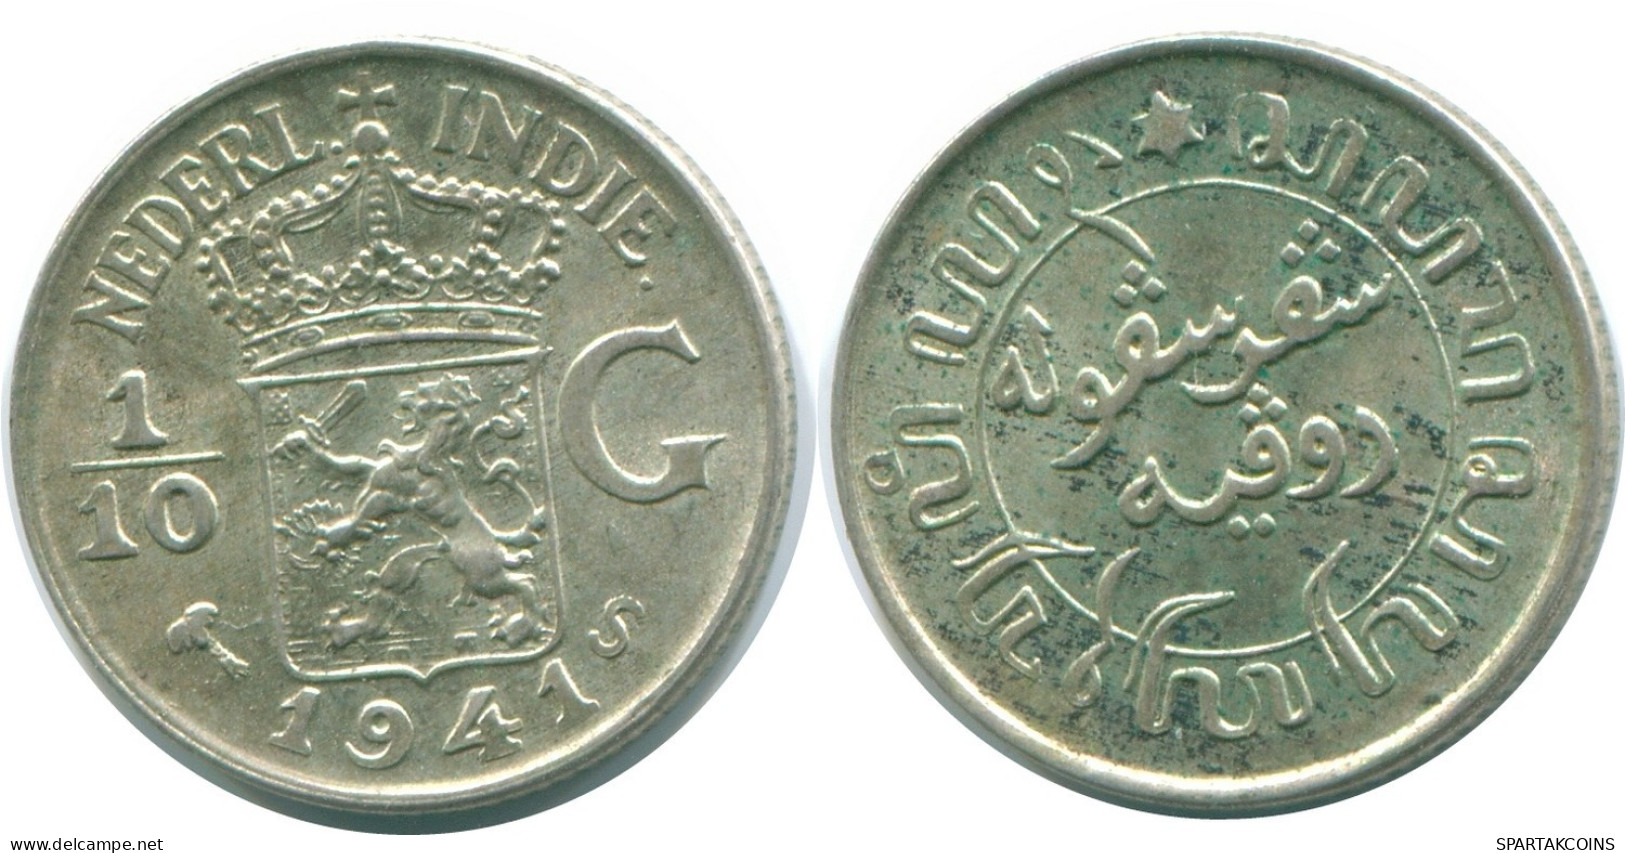 1/10 GULDEN 1941 S NETHERLANDS EAST INDIES SILVER Colonial Coin #NL13577.3.U.A - Dutch East Indies